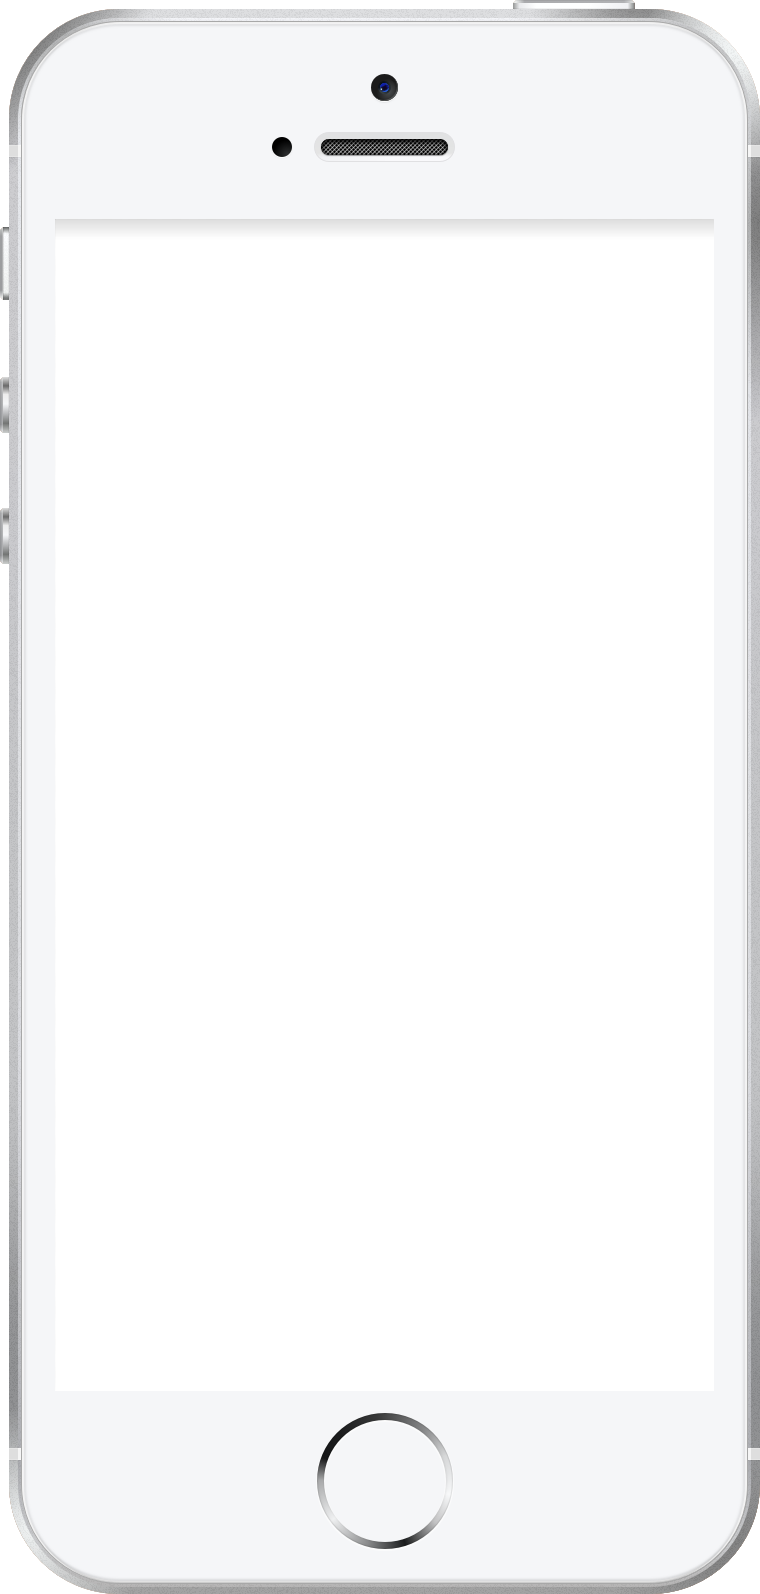 A white screen appears and the application becomes inactive when multitouch